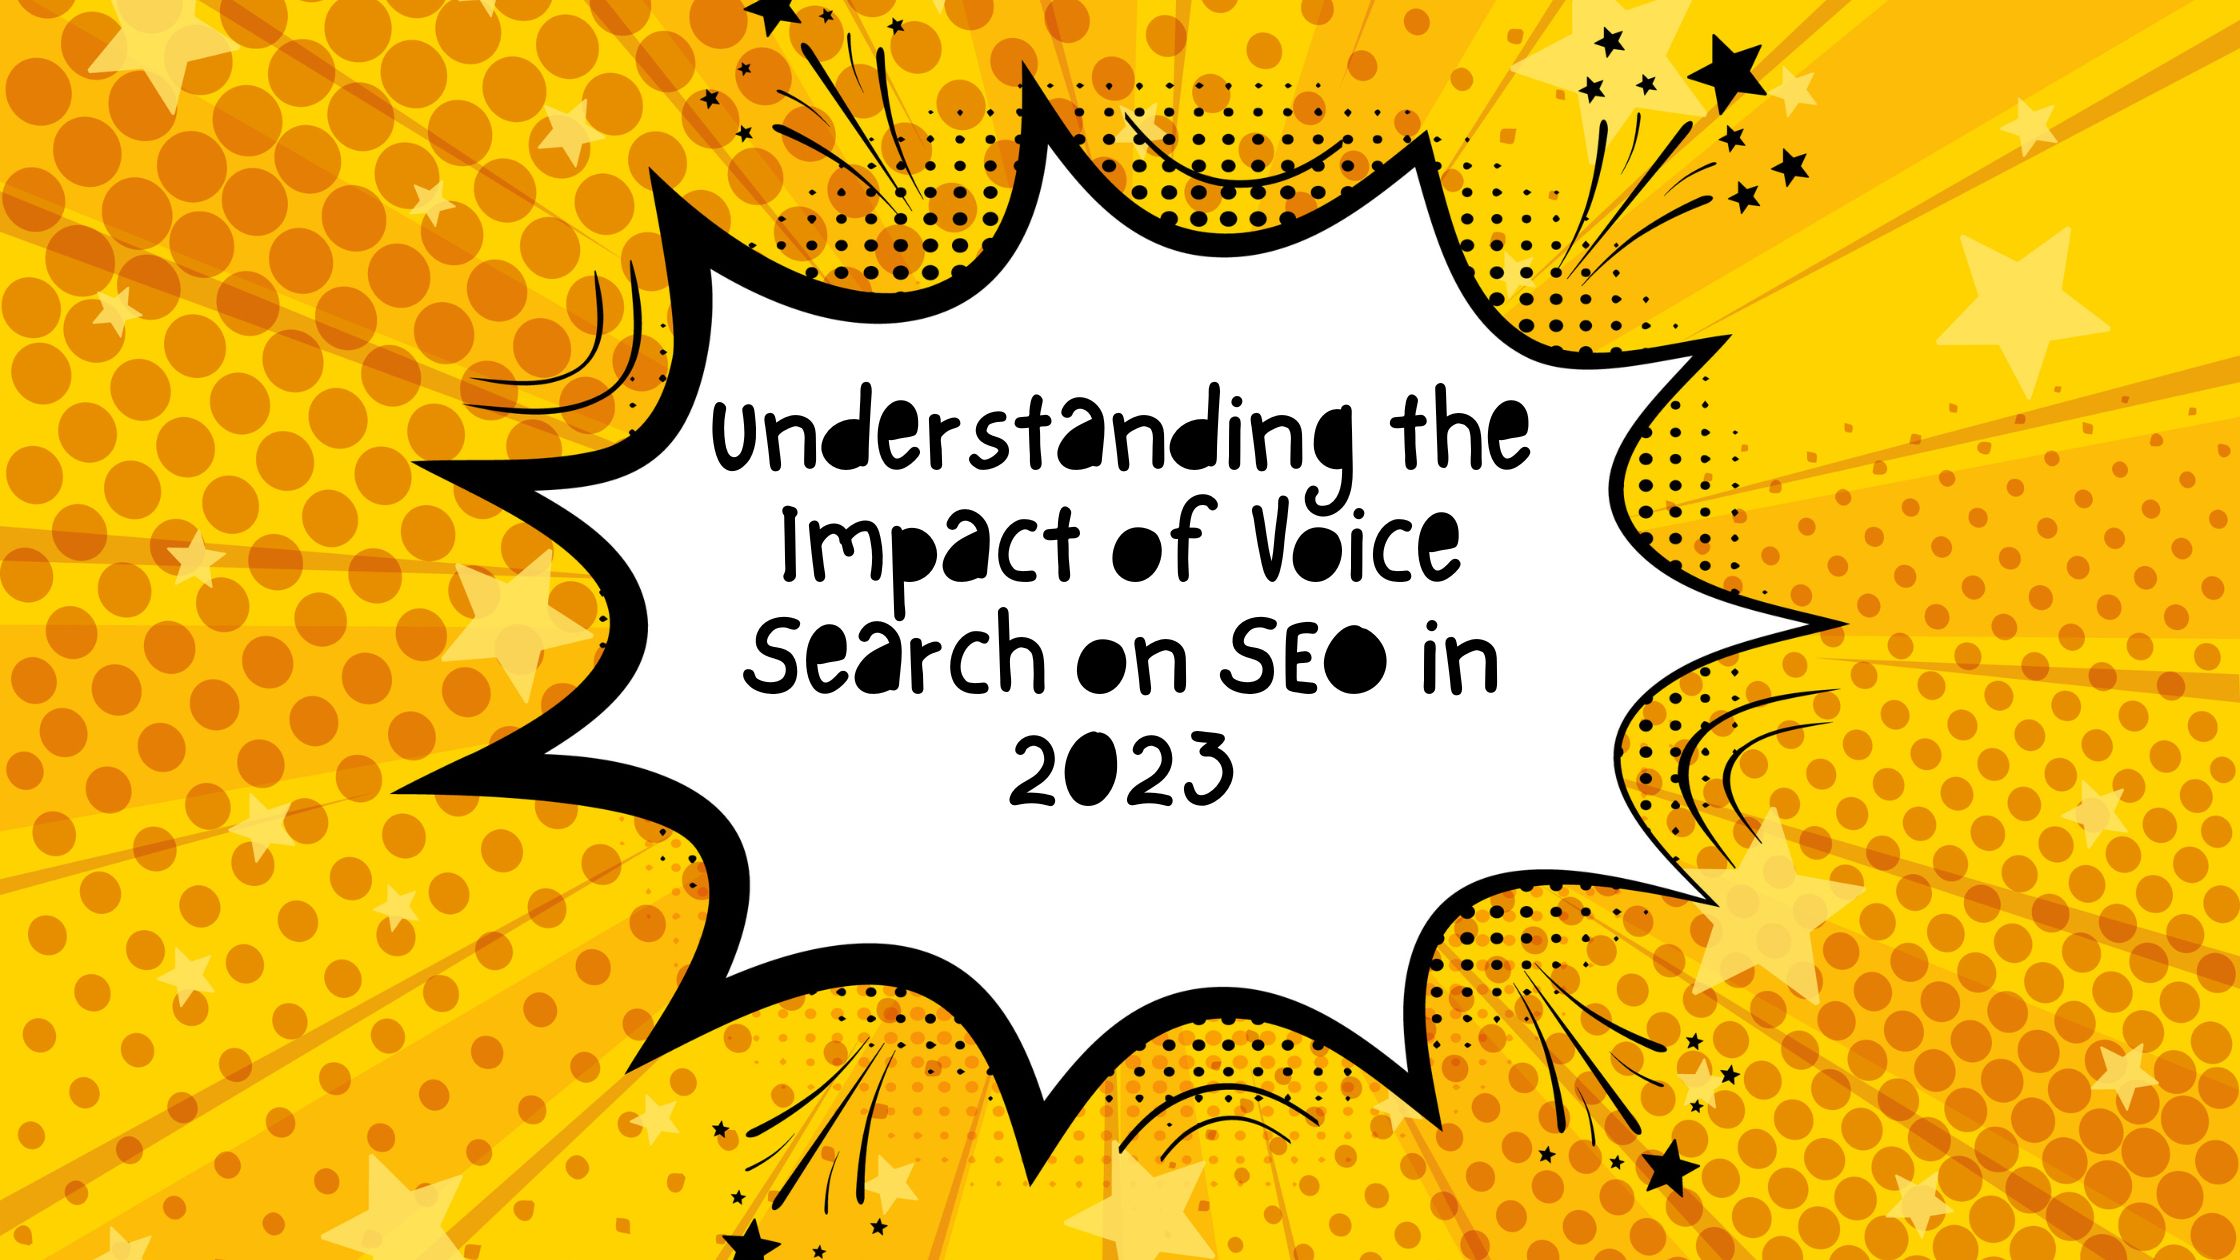 Understanding the Impact of Voice Search on SEO in 2023